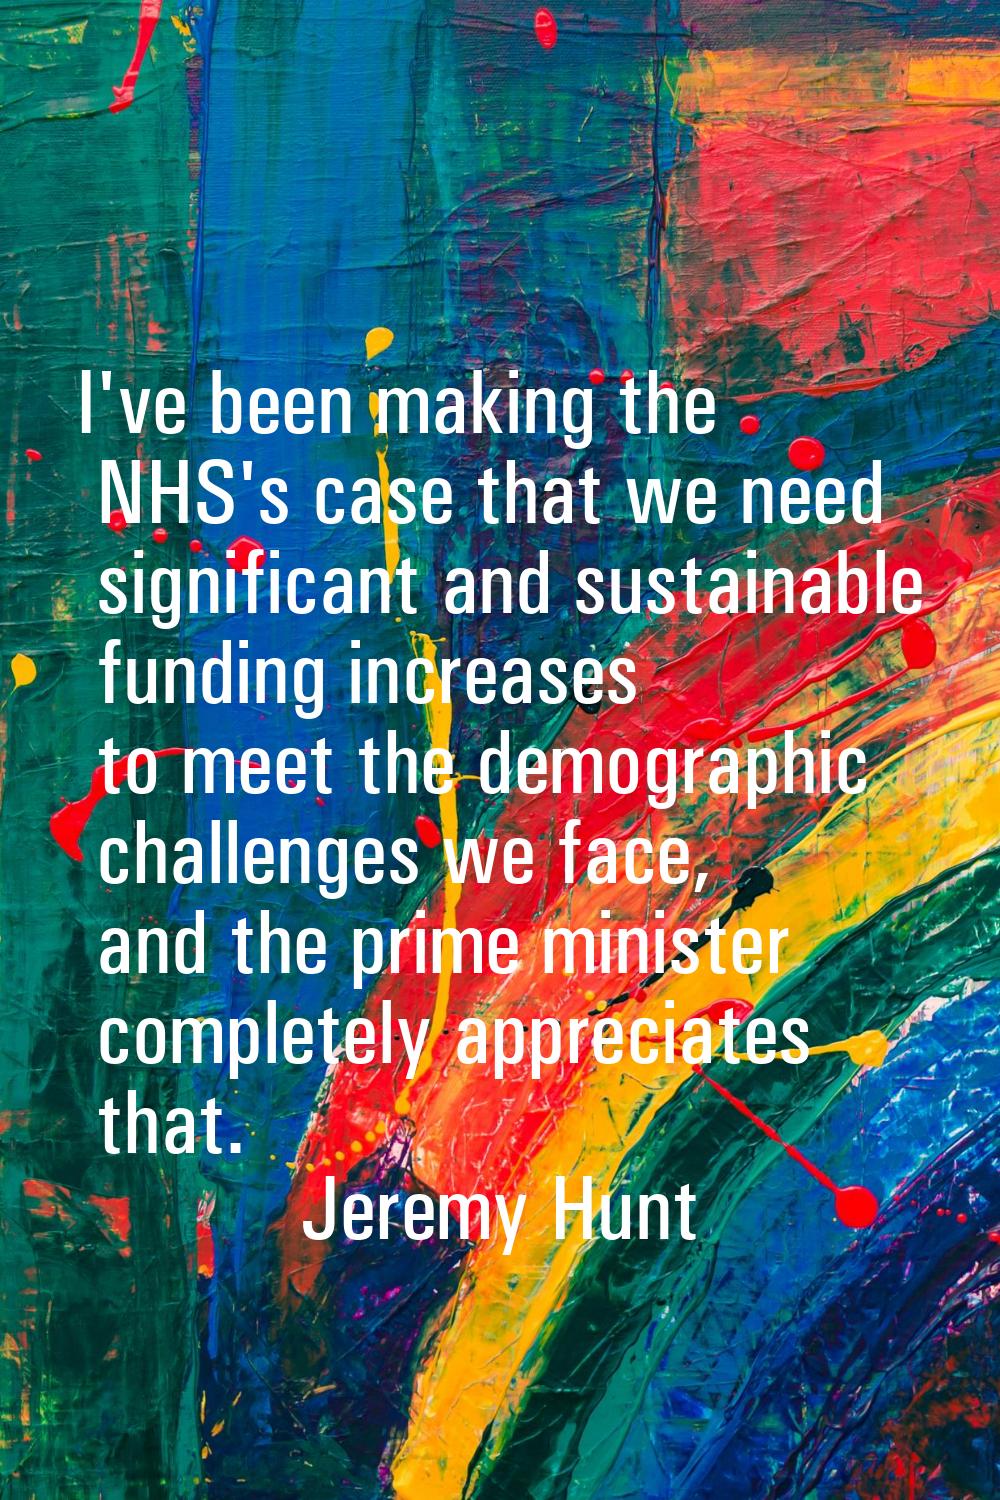 I've been making the NHS's case that we need significant and sustainable funding increases to meet 